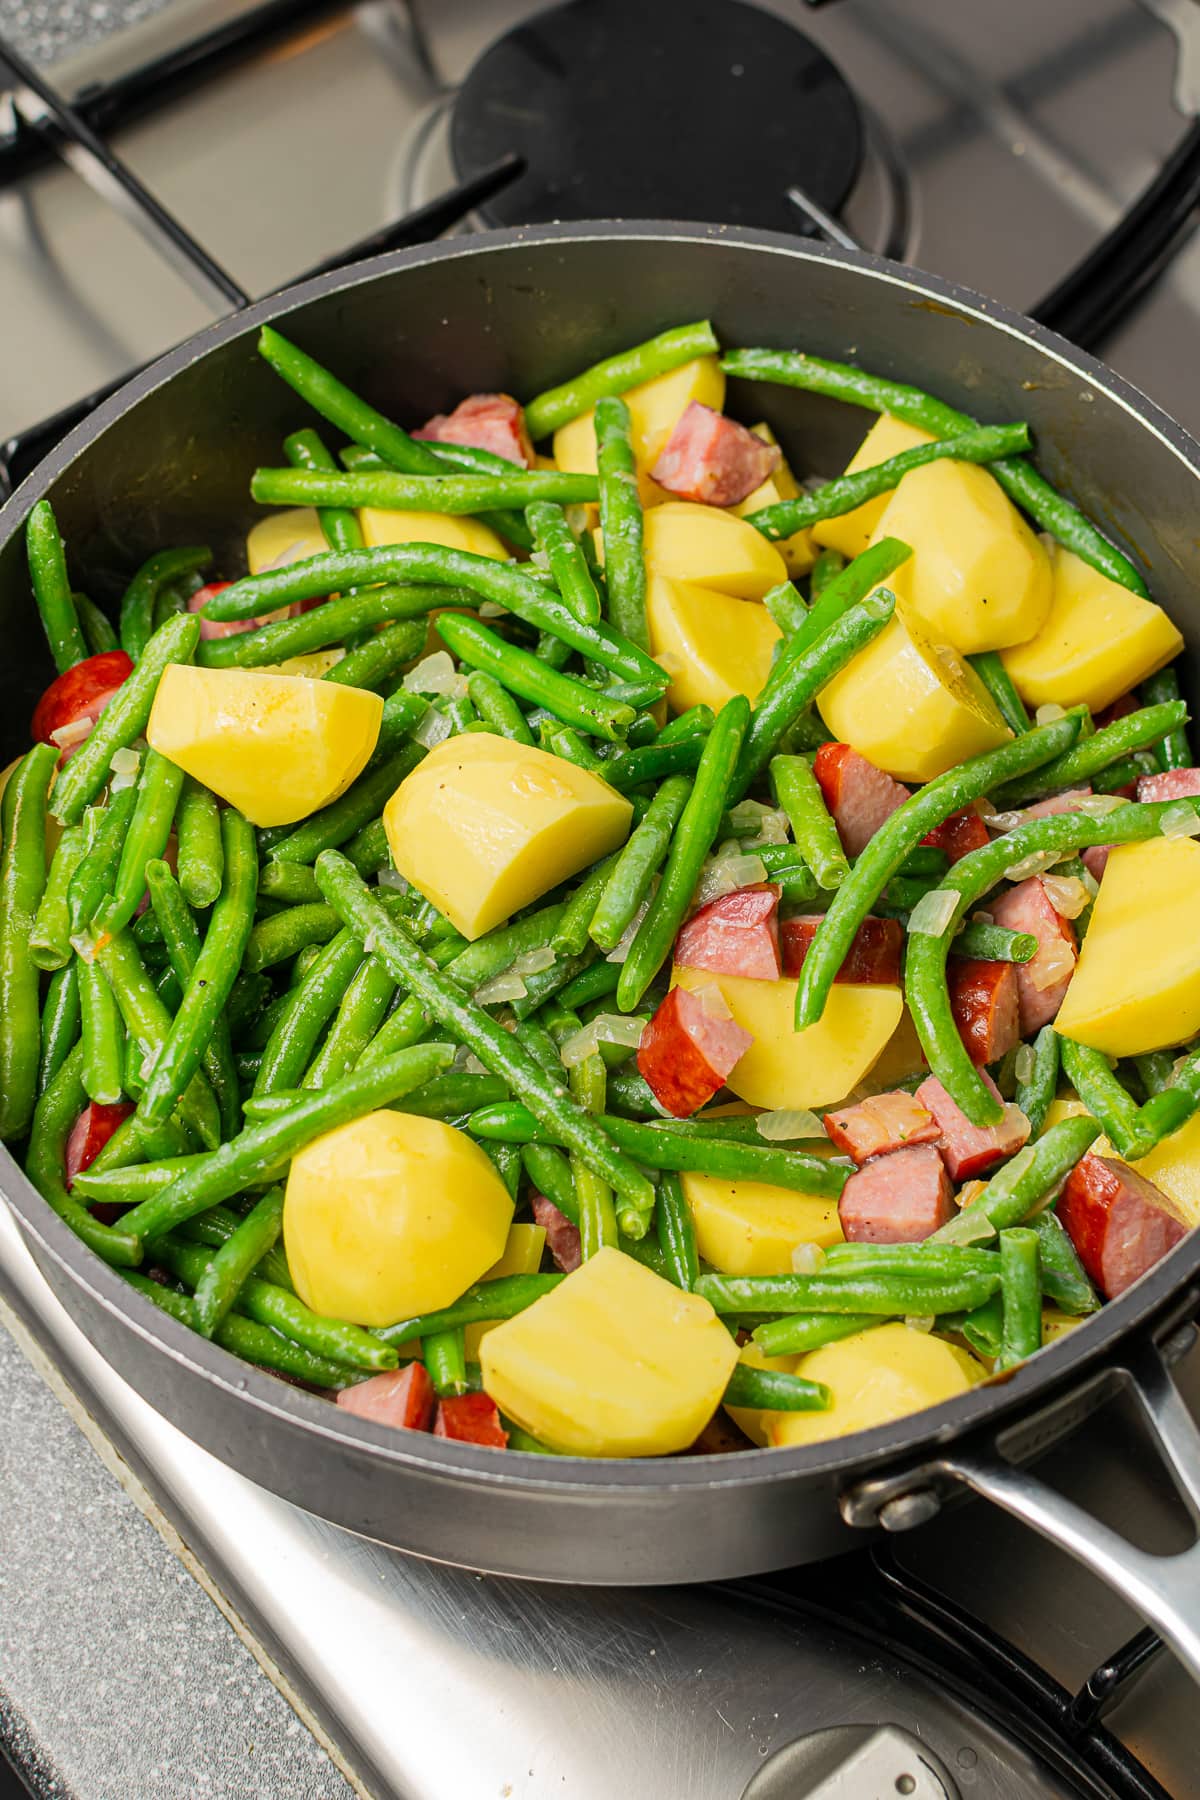 The skillet showing the potatoes, green beans, and kielbasa mid-cooking process.